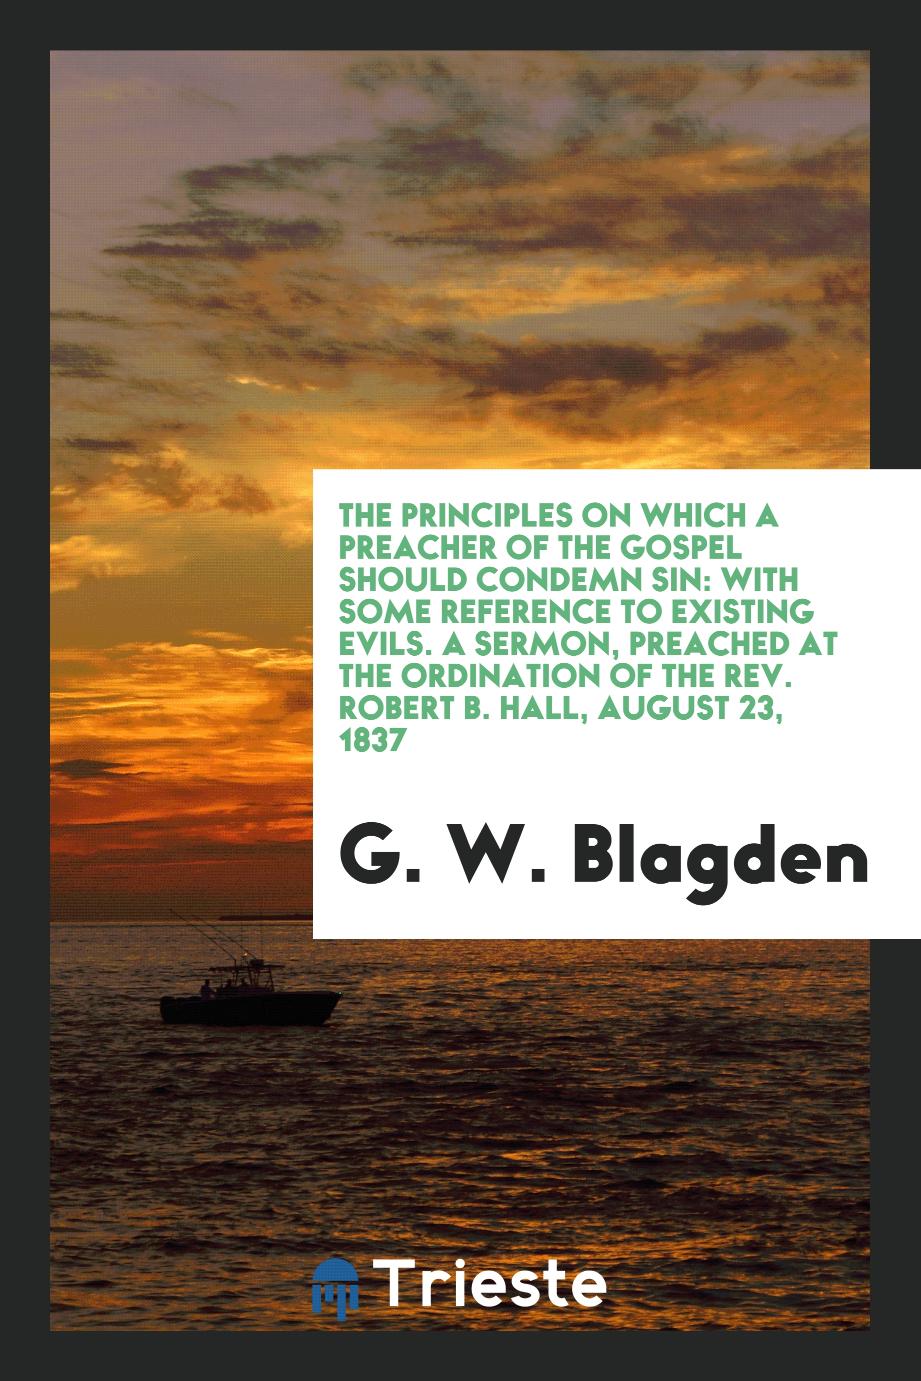 The Principles on which a Preacher of the Gospel Should Condemn Sin: With some reference to existing evils. A Sermon, preached at the ordination of the Rev. Robert B. Hall, August 23, 1837